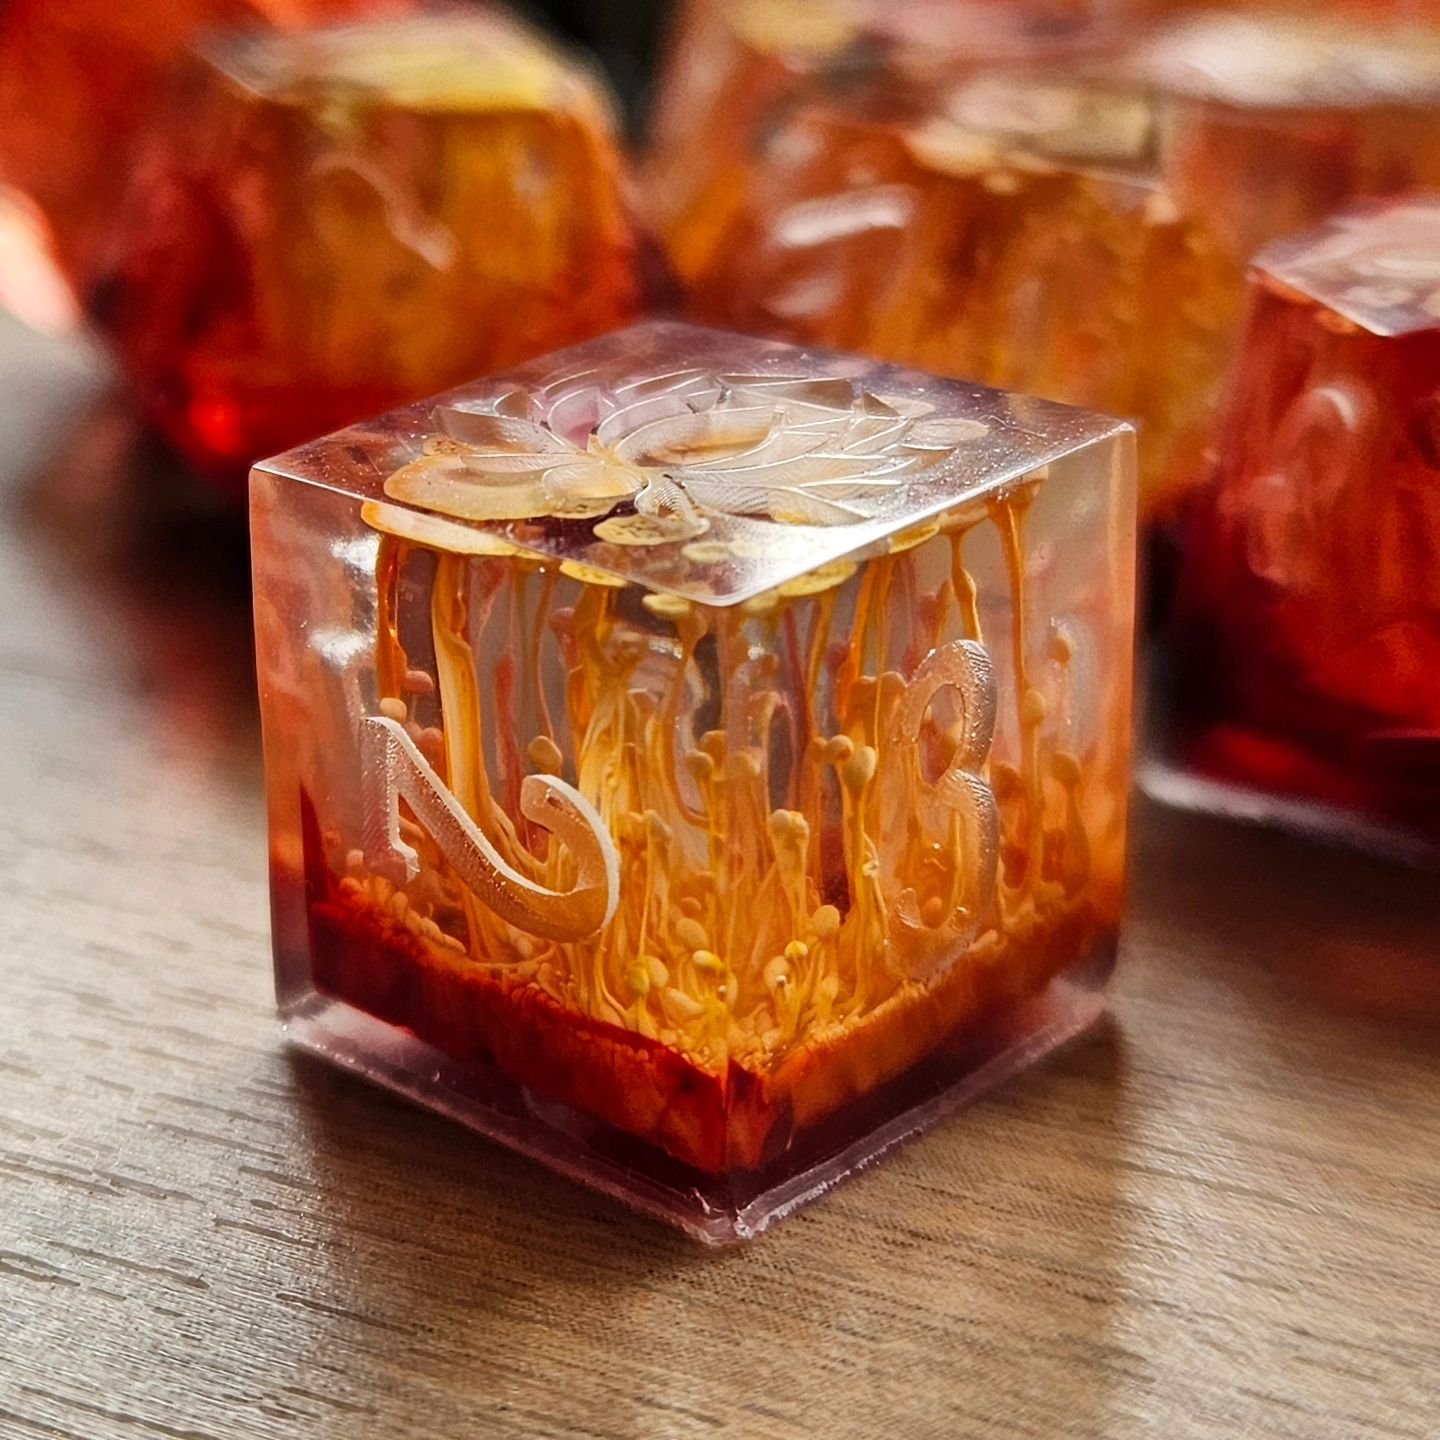 {RAW} Help me name these firey math rocks! Comment your ideas below. These will be available on the 28th of April at 6pm GMT 👀
&deg;
#dice  #diceset #dicemaking #dicegoblin #dnddice #dnd5e #dnd